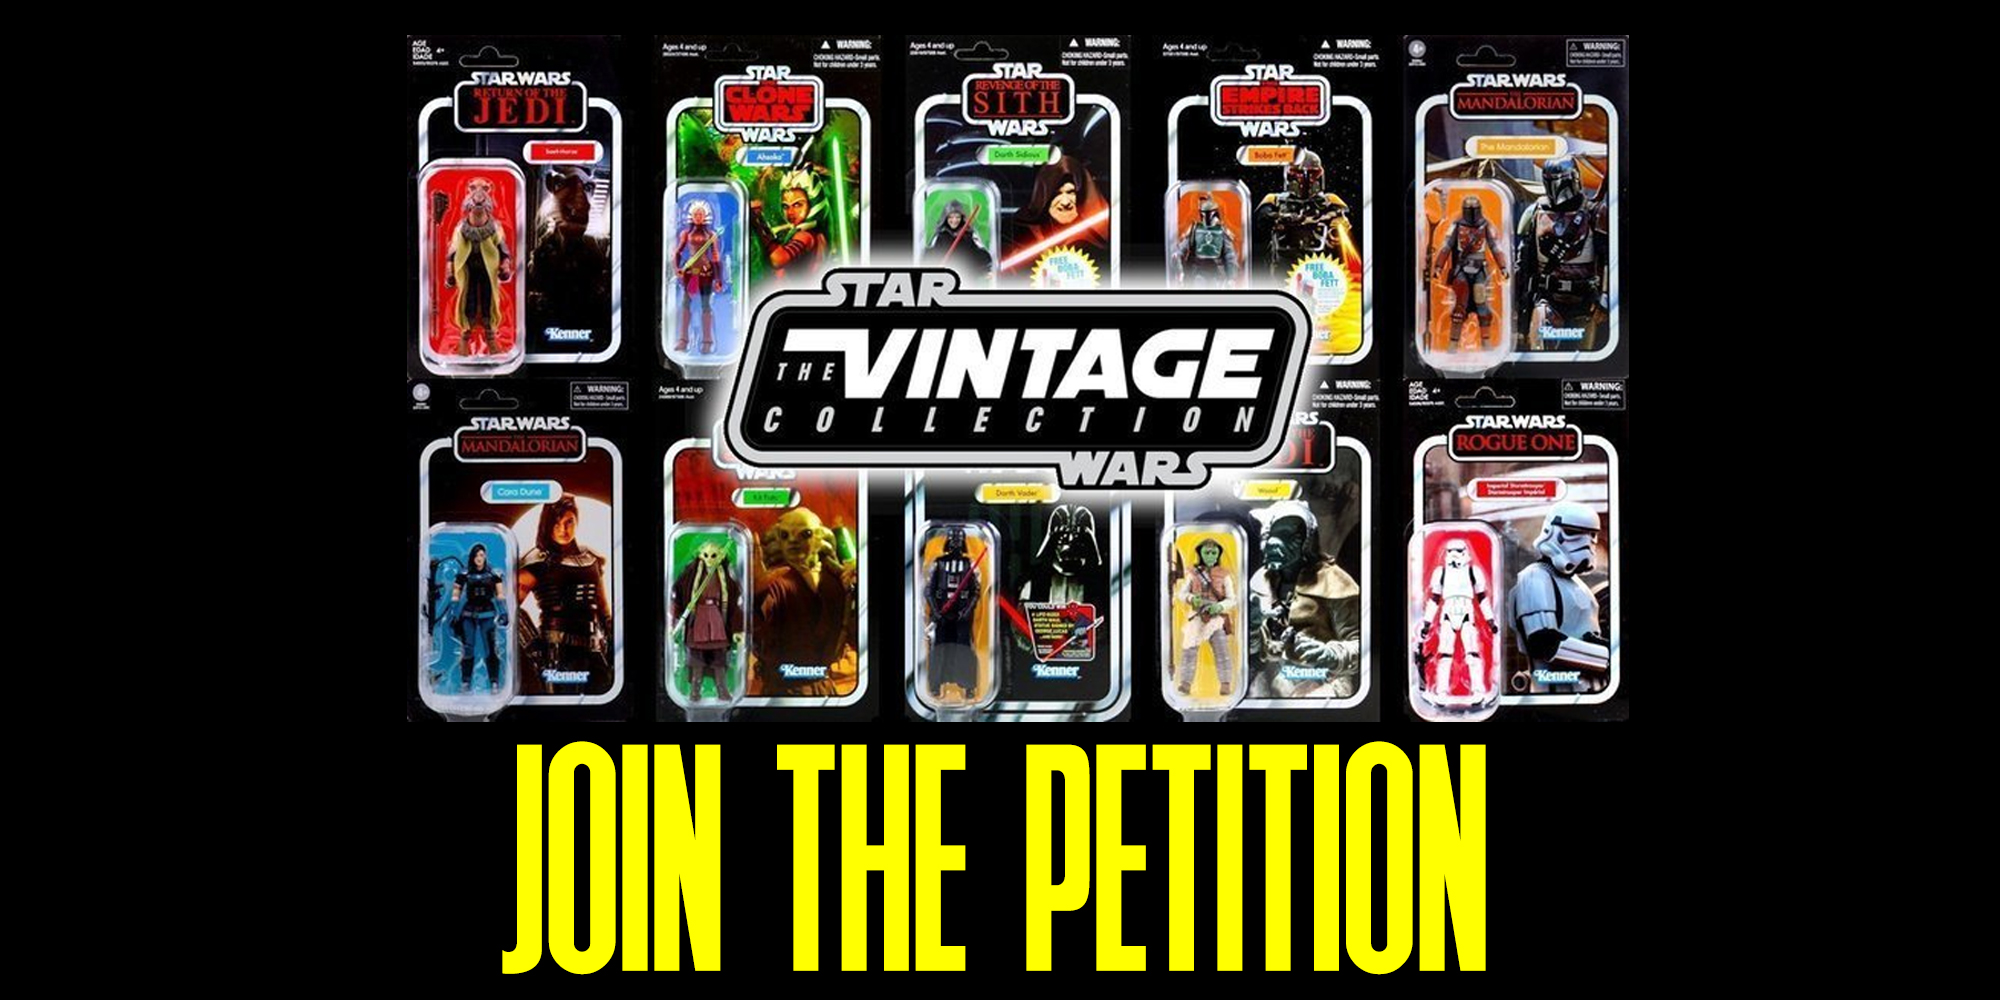 Sign The Vintage Collection Petition